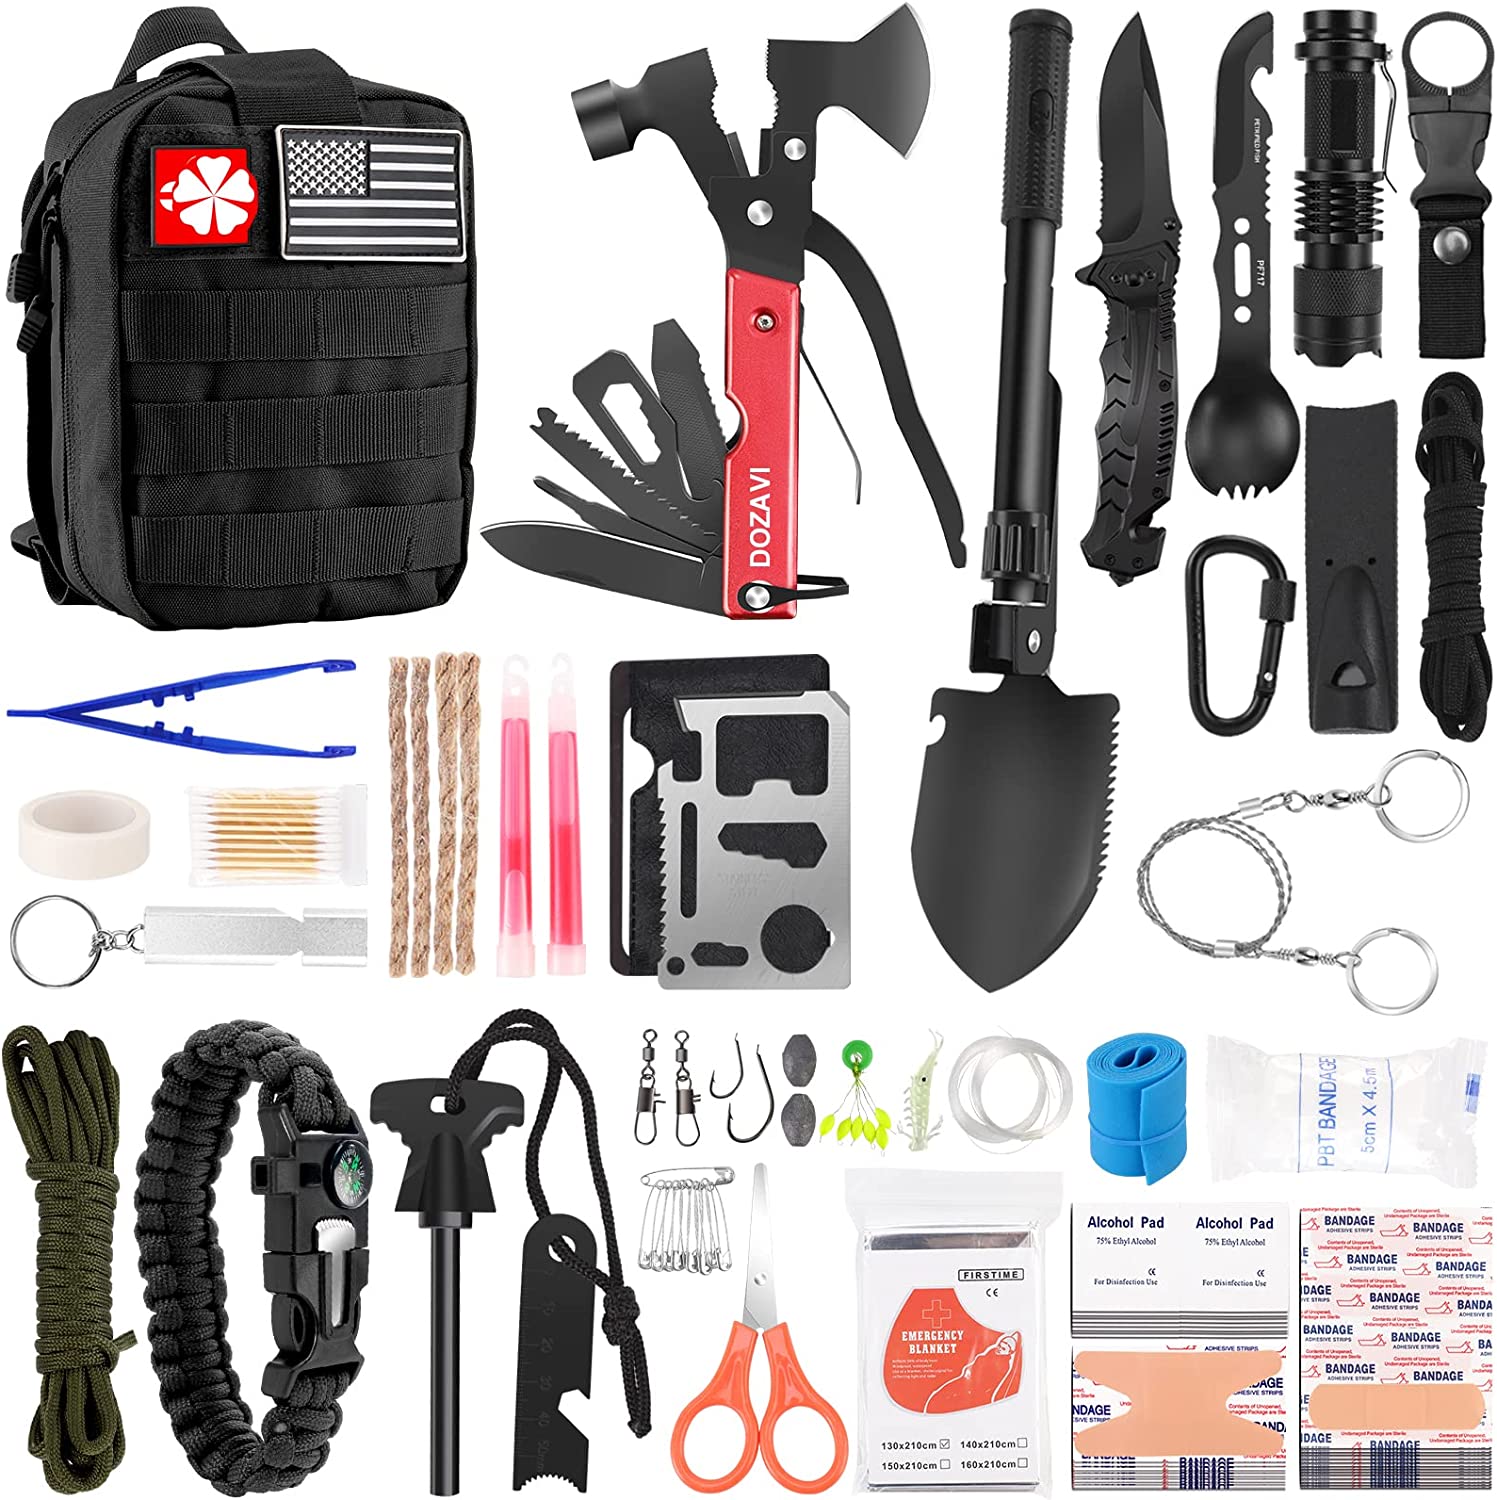 Gift for Father’s Day Men Dad Husband,142 Pcs Survival Kit and First Aid Kit, Professional Emergency Kits Survival Gear and Equipment with Molle Pouch, for Men Camping Outdoor Adventures